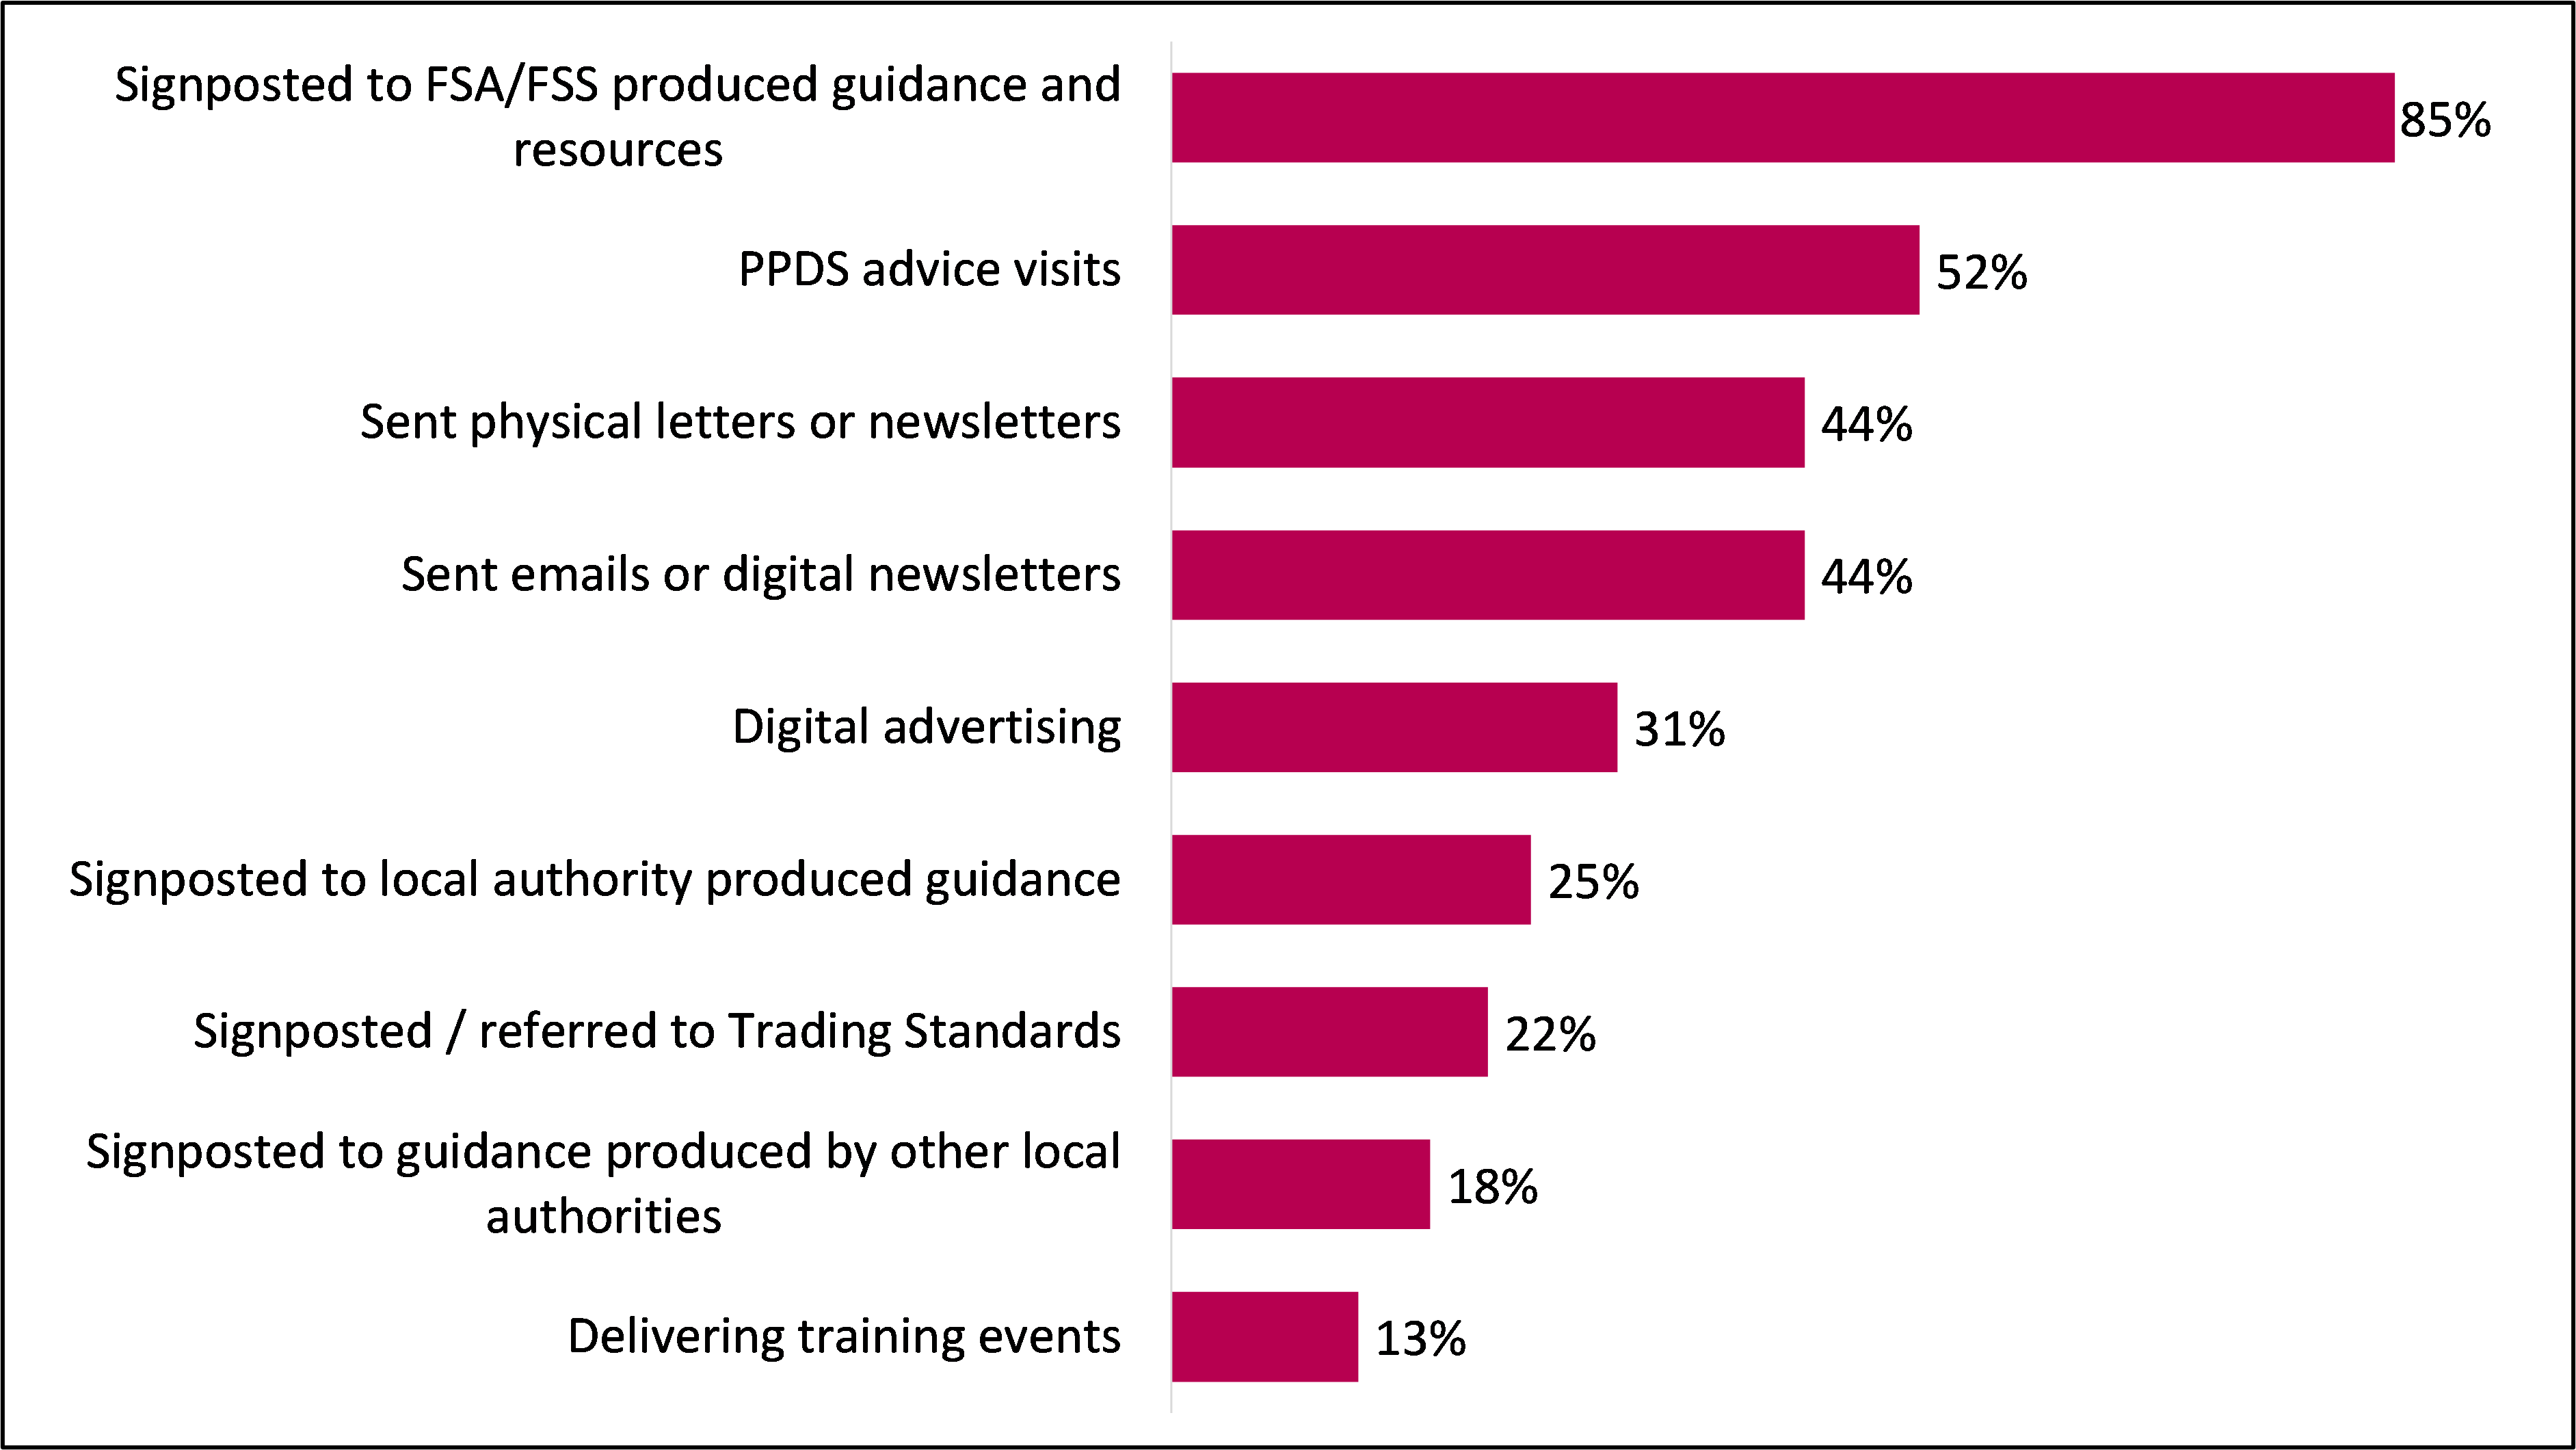 Bar chart showing what activities Local Authorities have used to support and increase compliance with Pre-Packed for Direct Sale requirements.